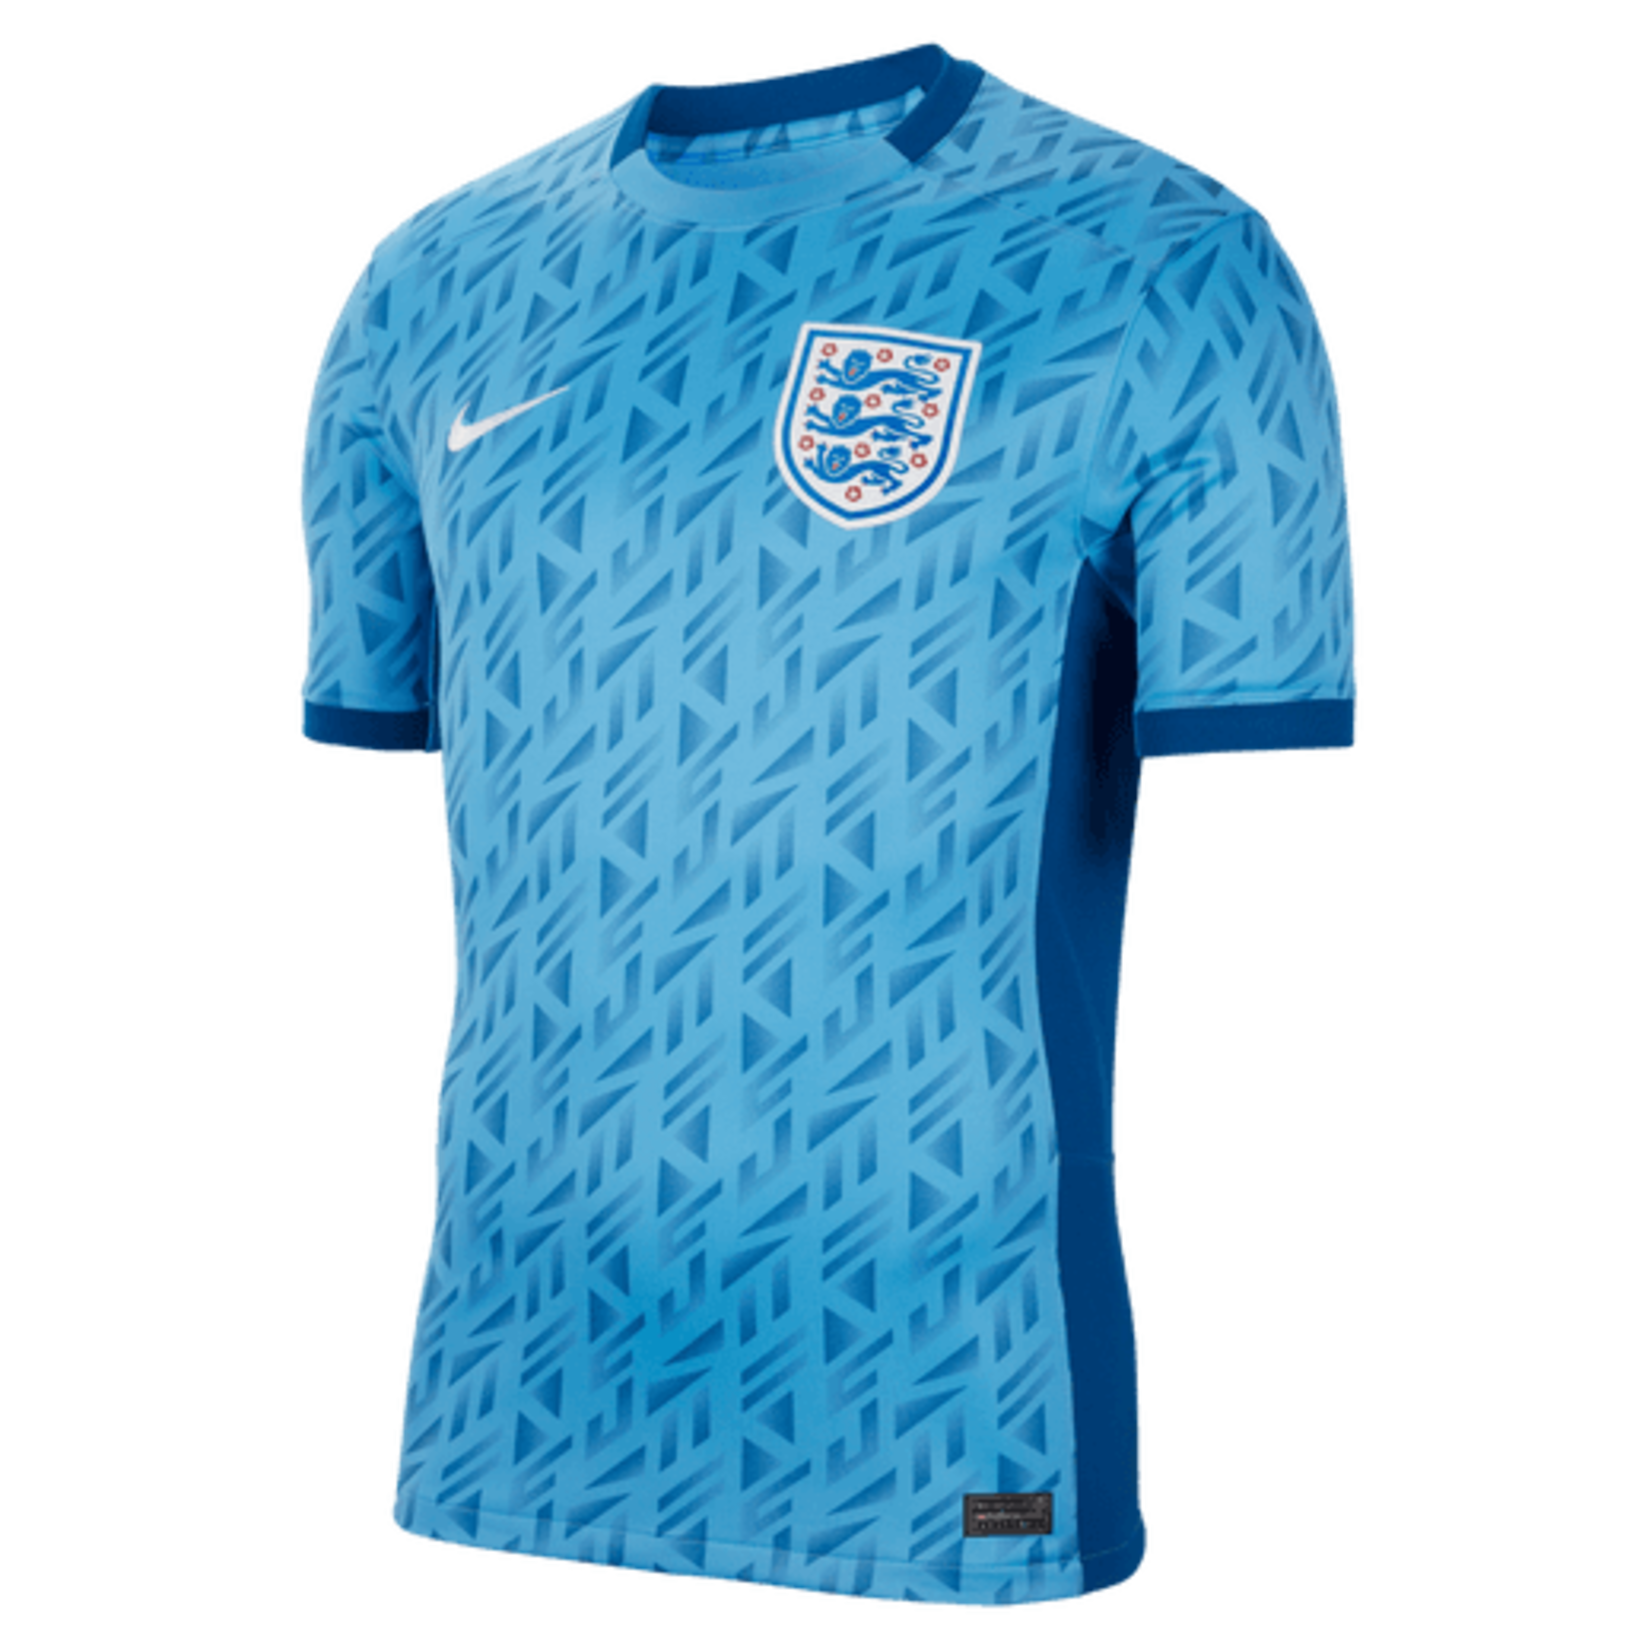 Nike England 23/24 Jersey- DR3959-462